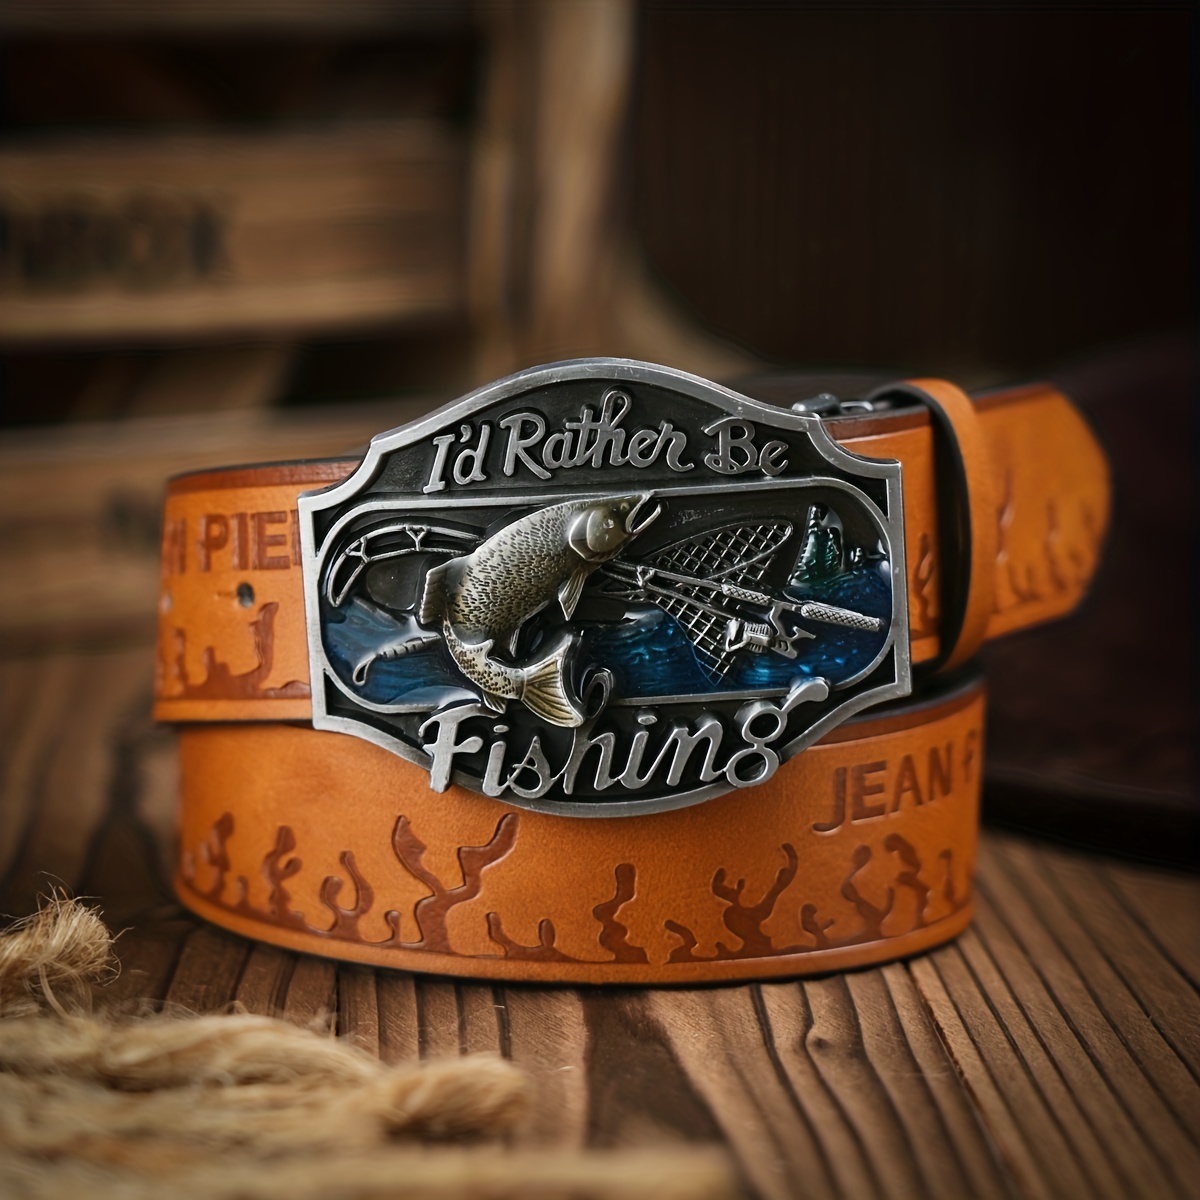 I'd Rather Be Fishing Men's Belt Buckle - Silver, Red and Blue colors